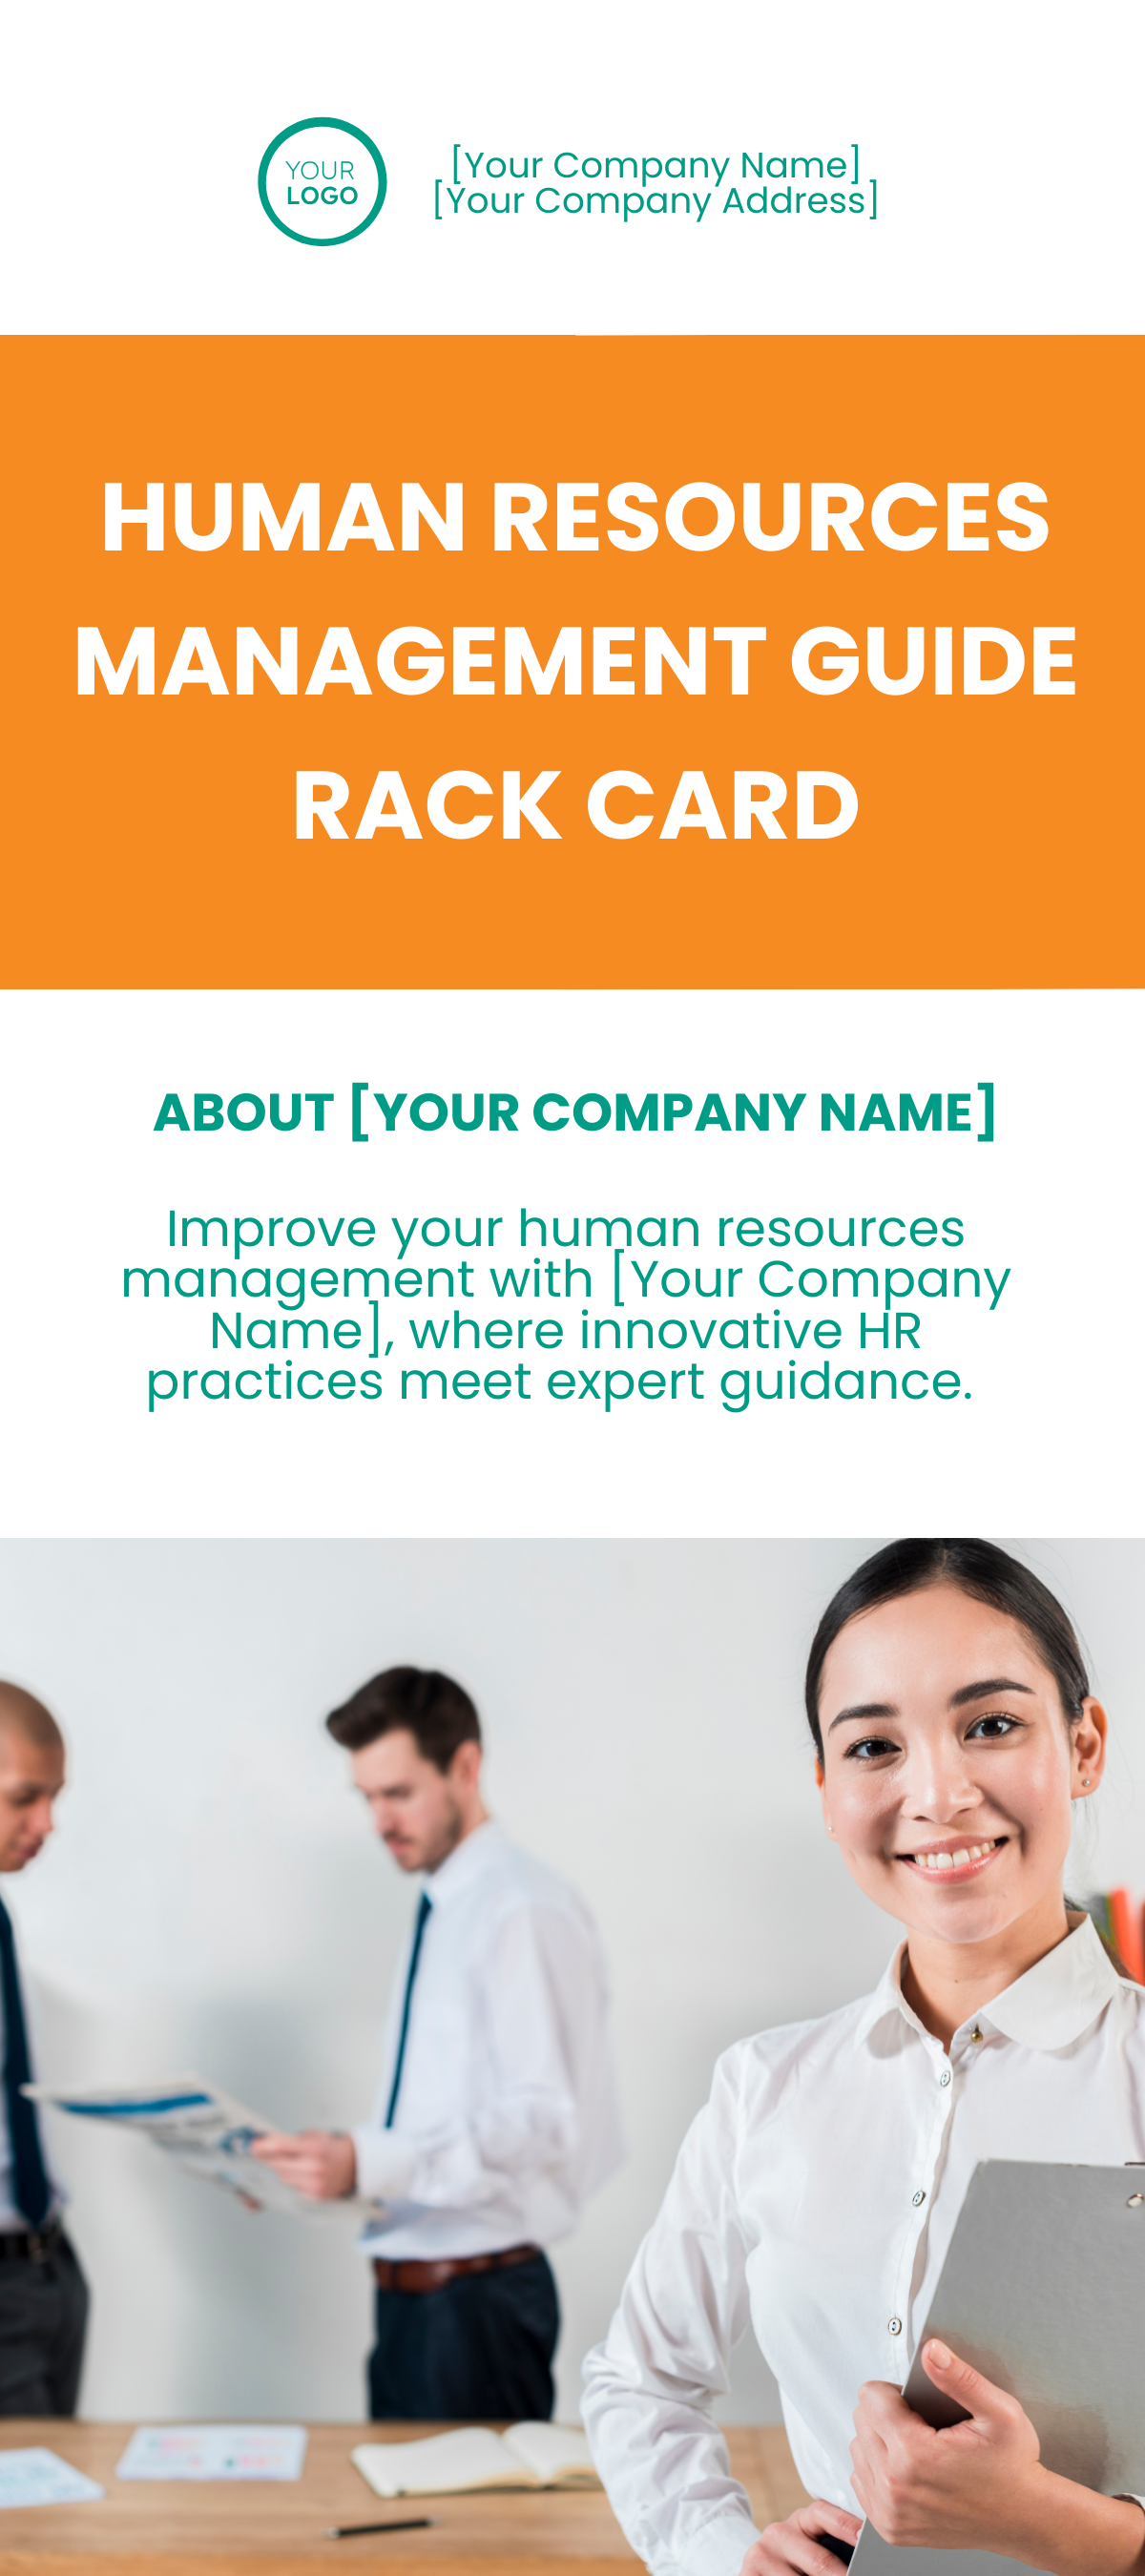 Human Resources Management Guide Rack Card